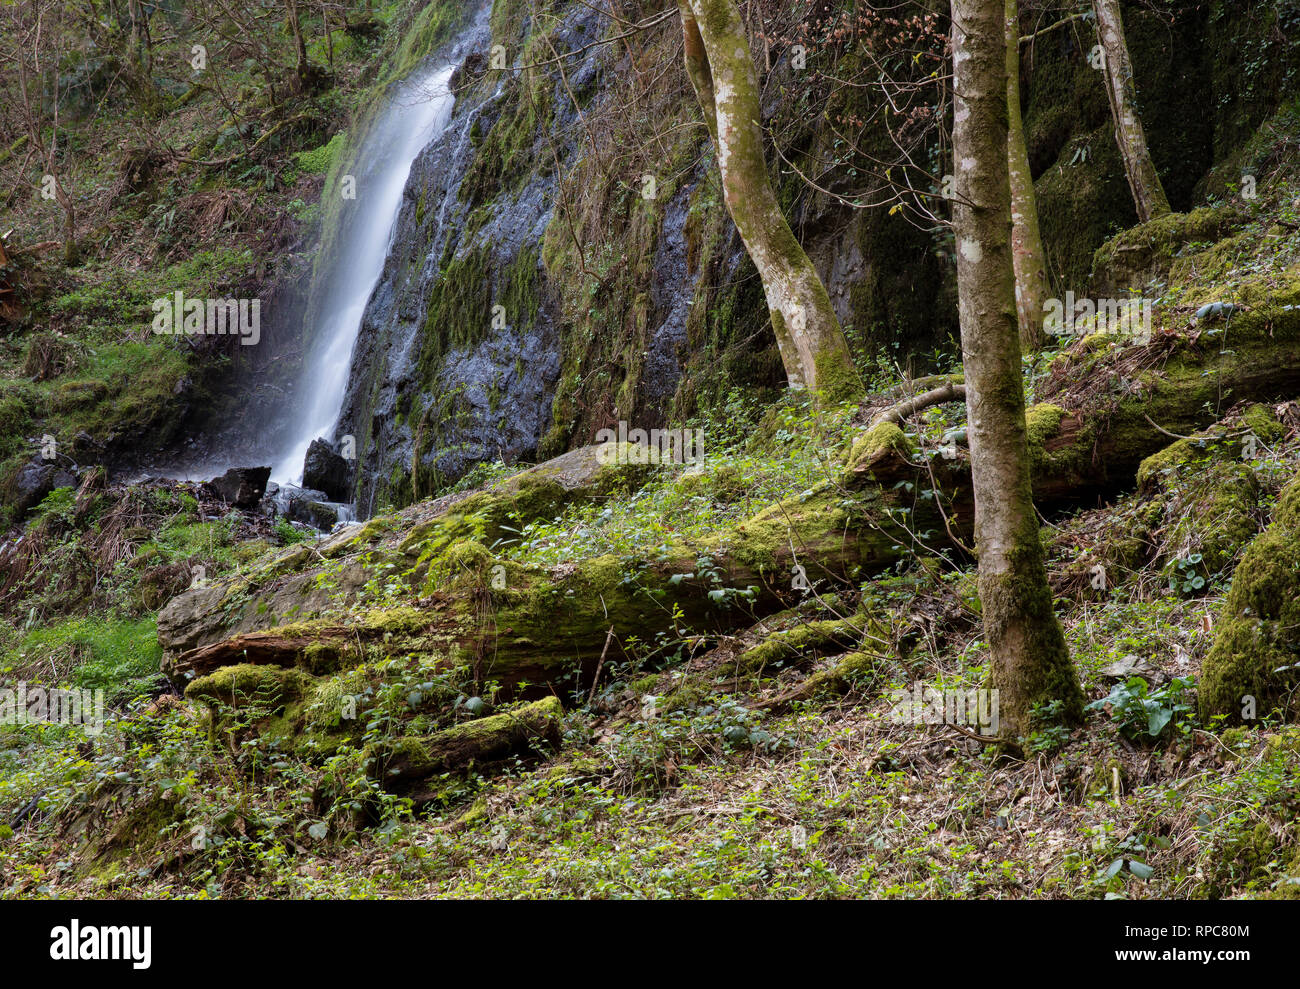 Canonteign Falls is a waterfall in Canonteign in the Teign Valley and Dartmoor National Park near Chudleigh, South Devon, England. It is 220 feet high. Stock Photo